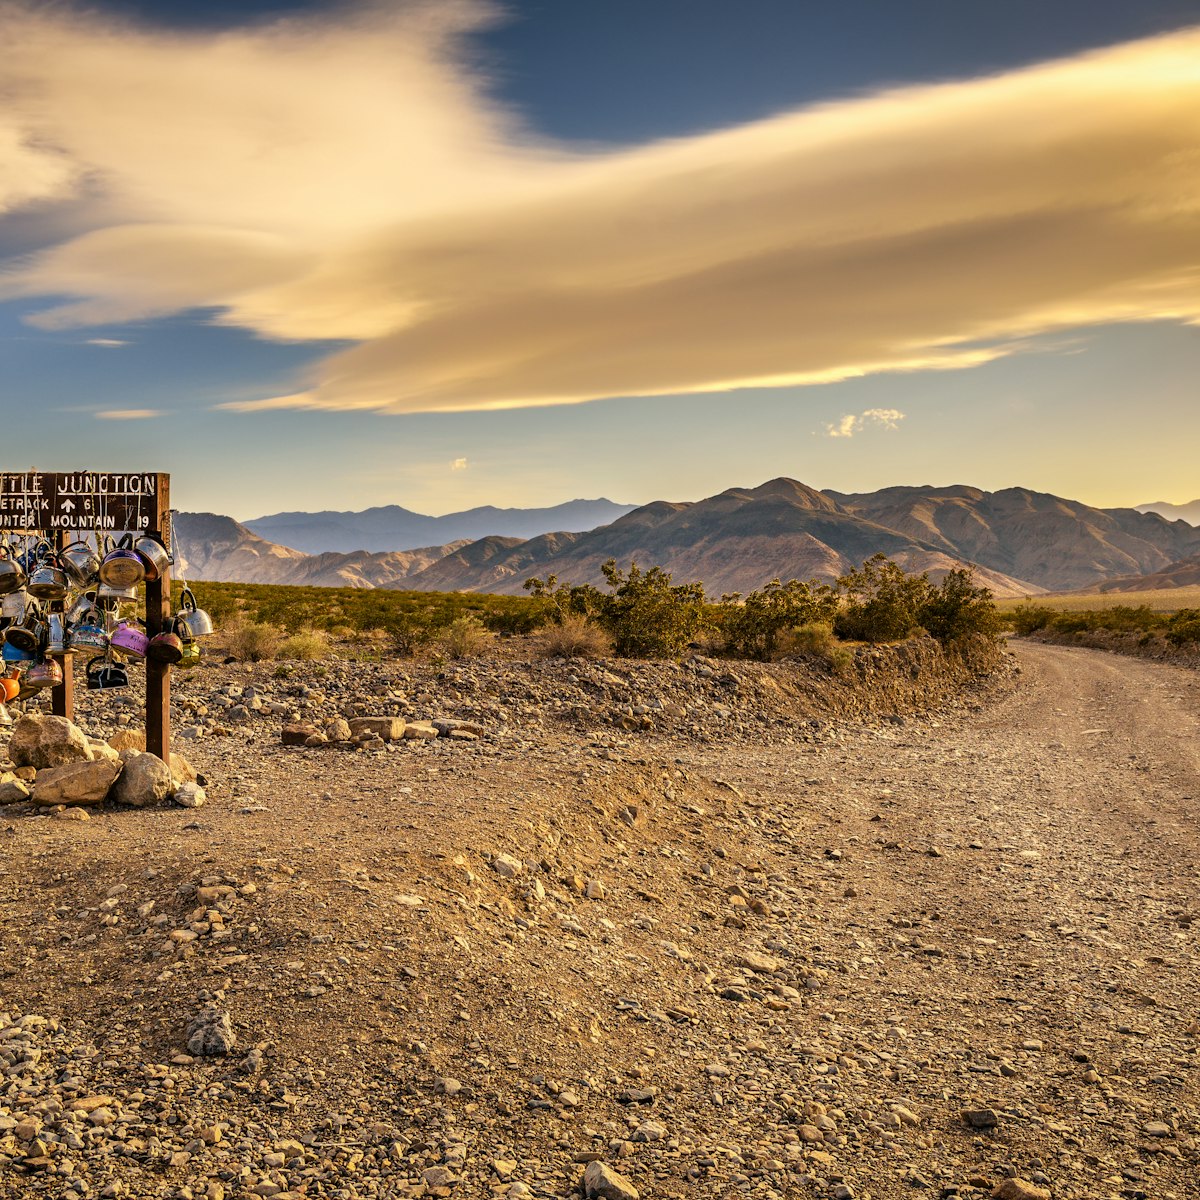 Sign for Teakettle Junction on the way to Racetrack Playa in Death Valley National Park.